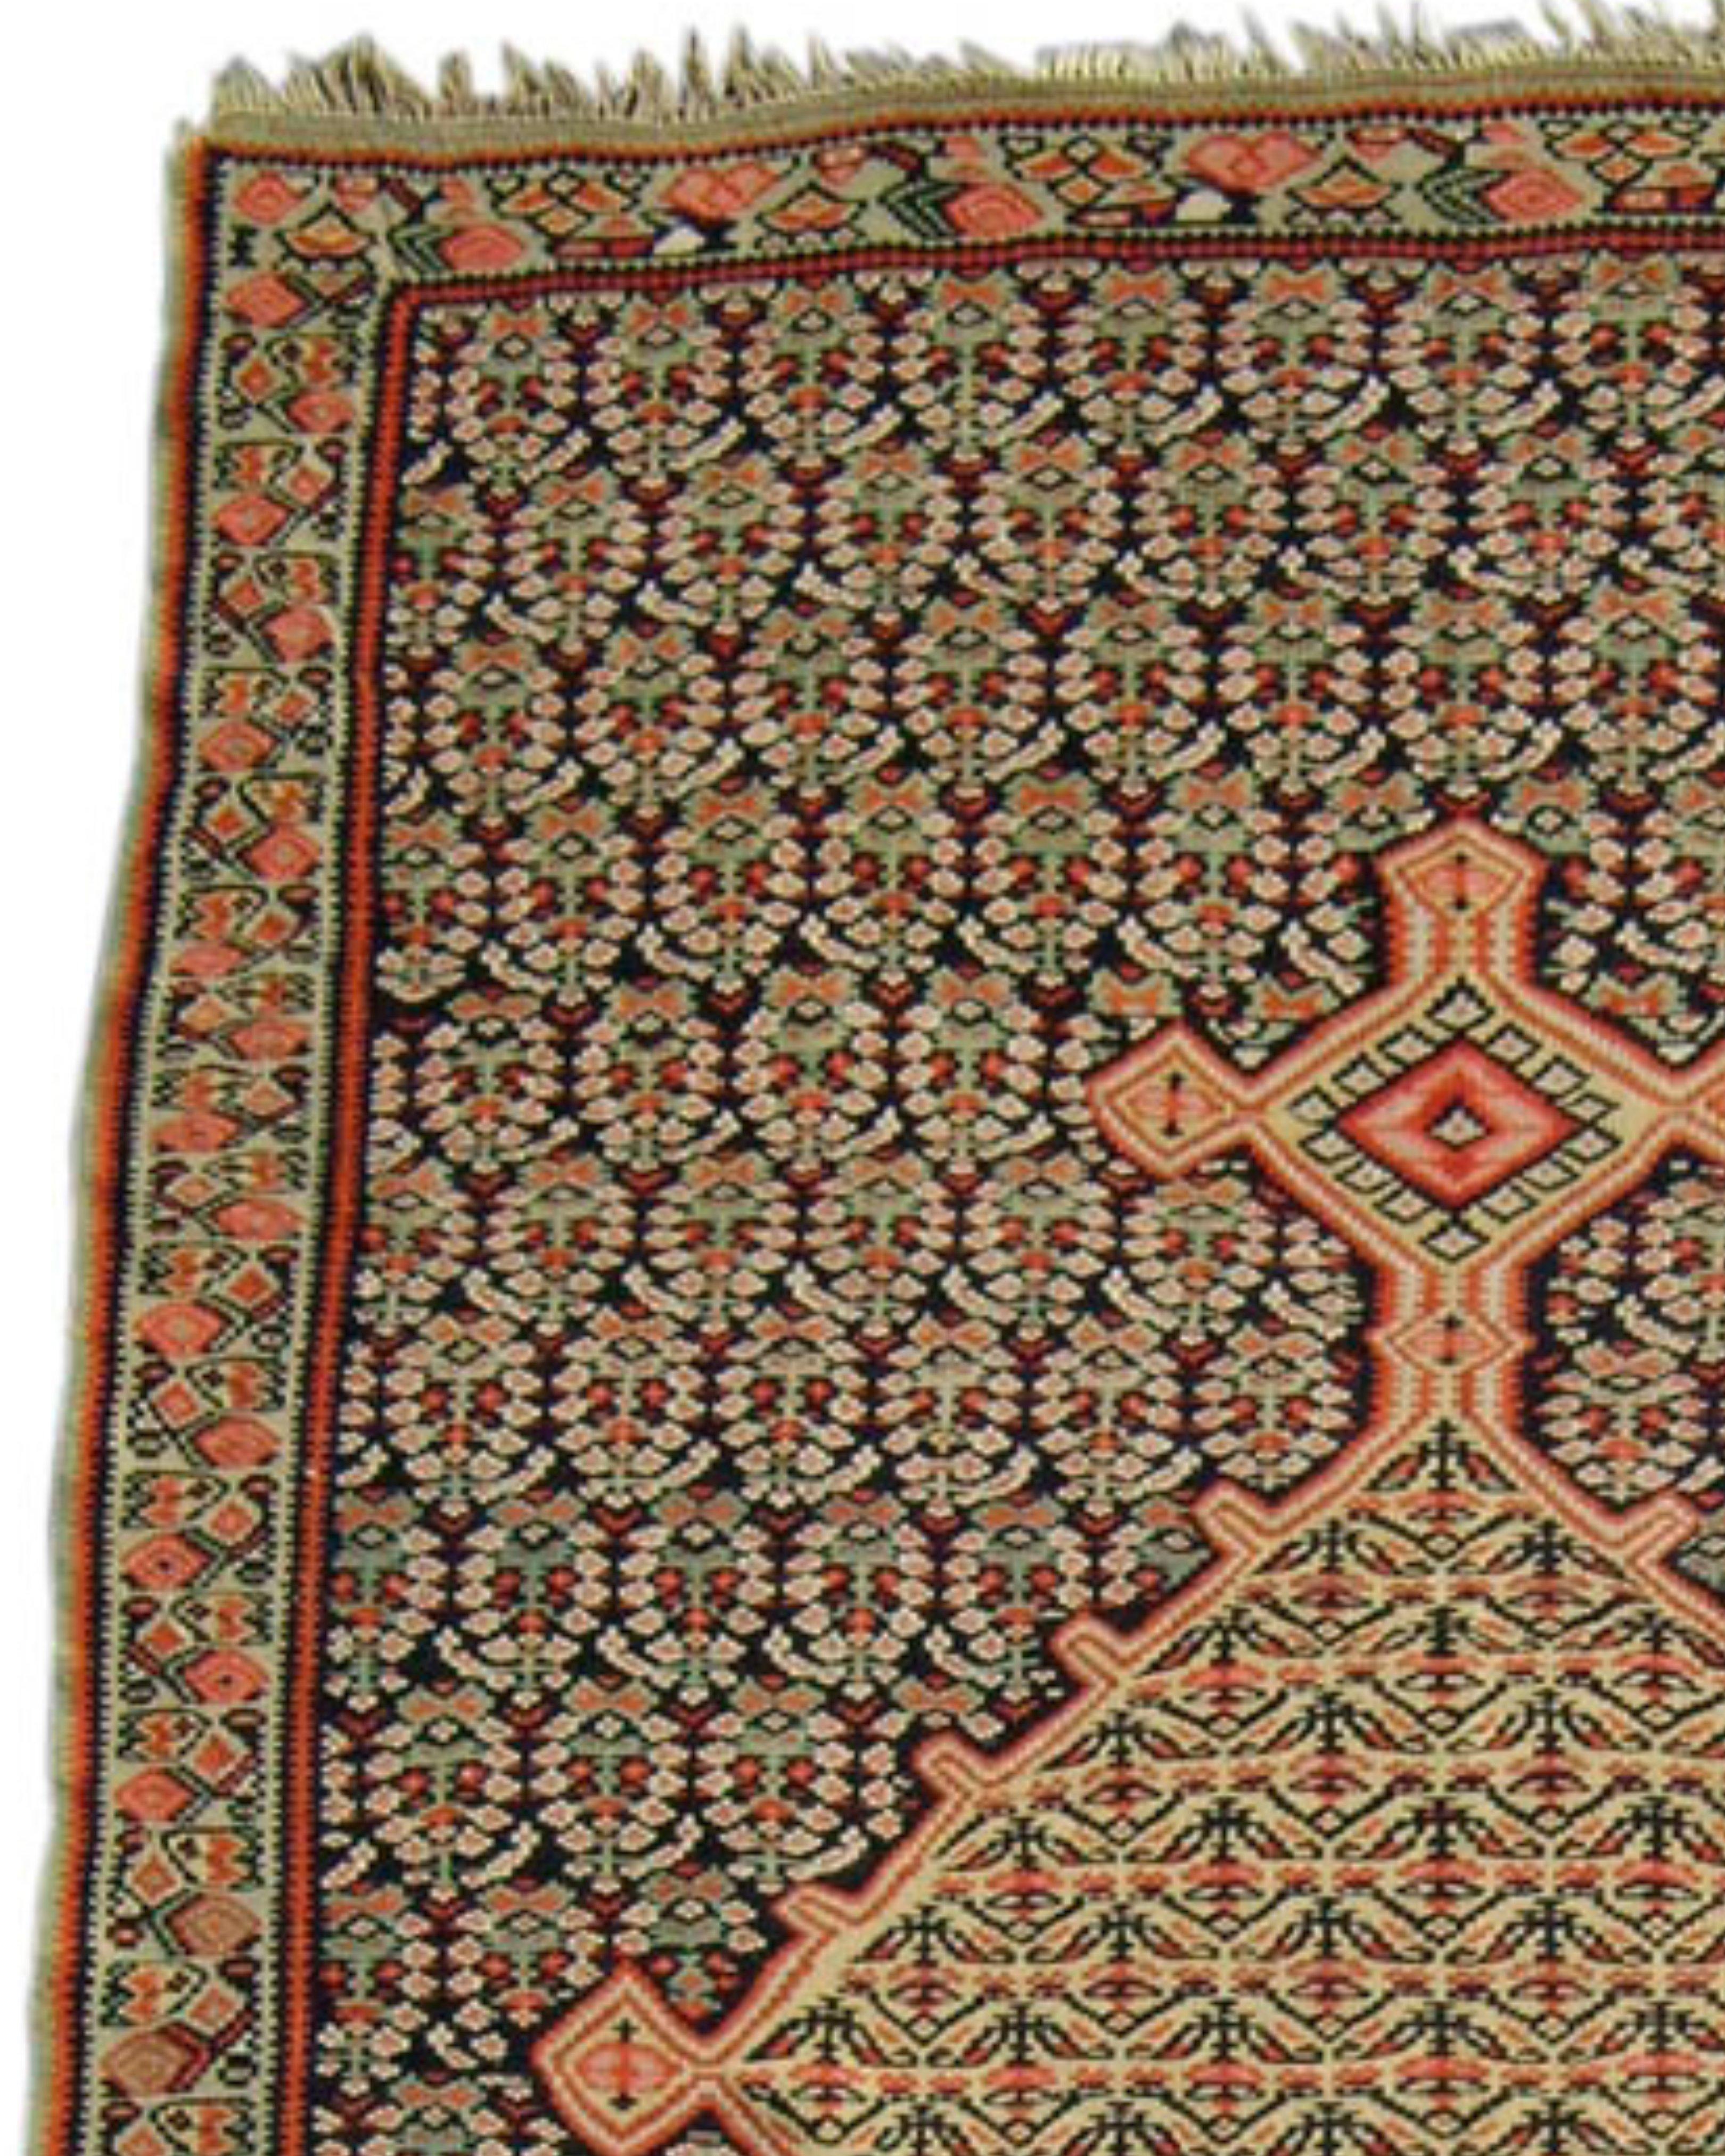 Hand-Woven Antique Persian Senneh Kilim Rug, 19th Century For Sale